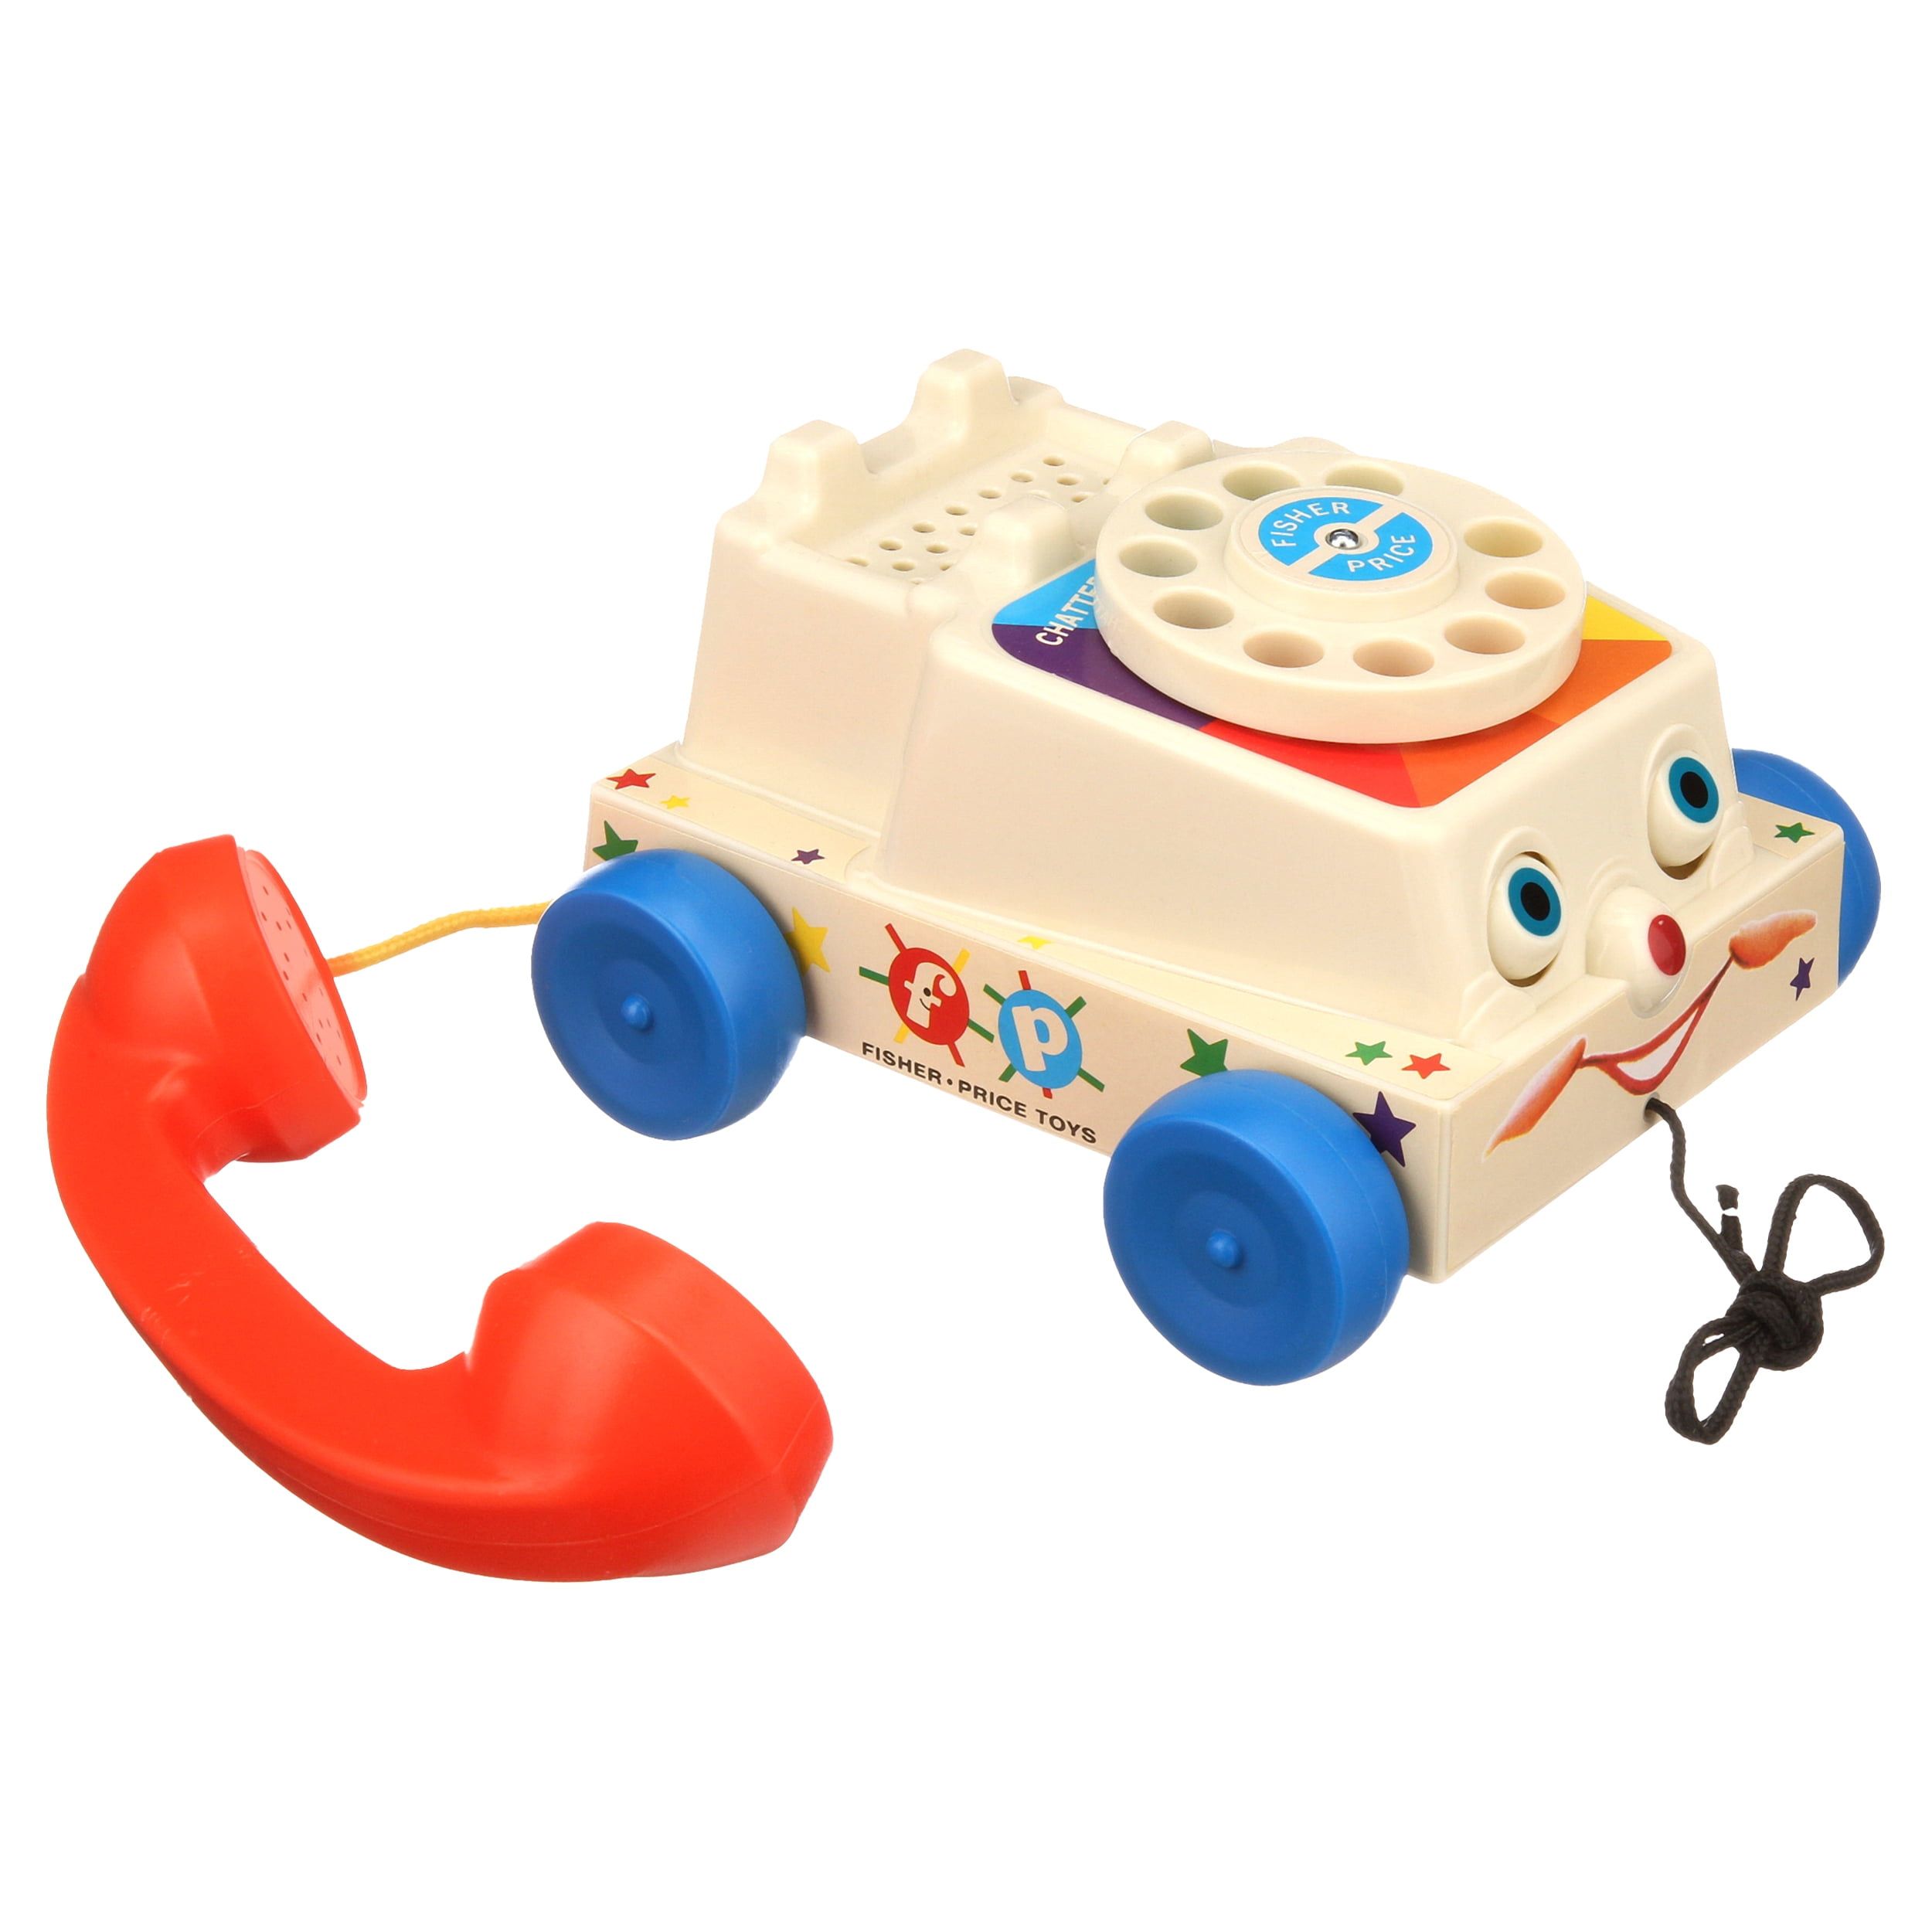 Retro Chatter Telephone Fisher-Price Classic Toys Brand New 